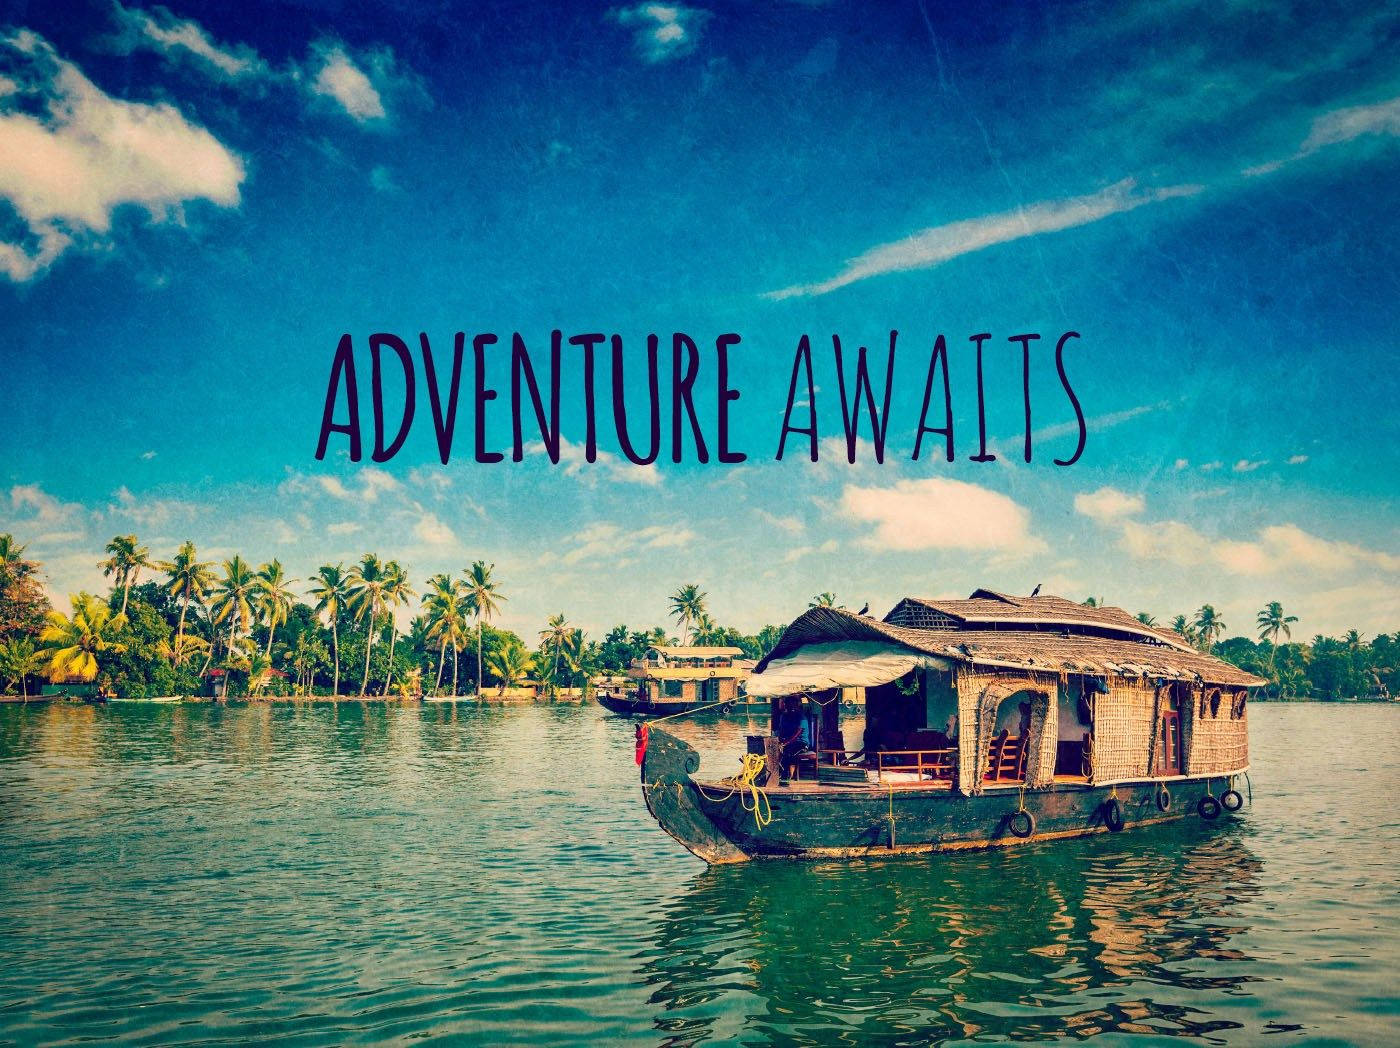 A Boat In The Water With The Words Adventure Awaits Background